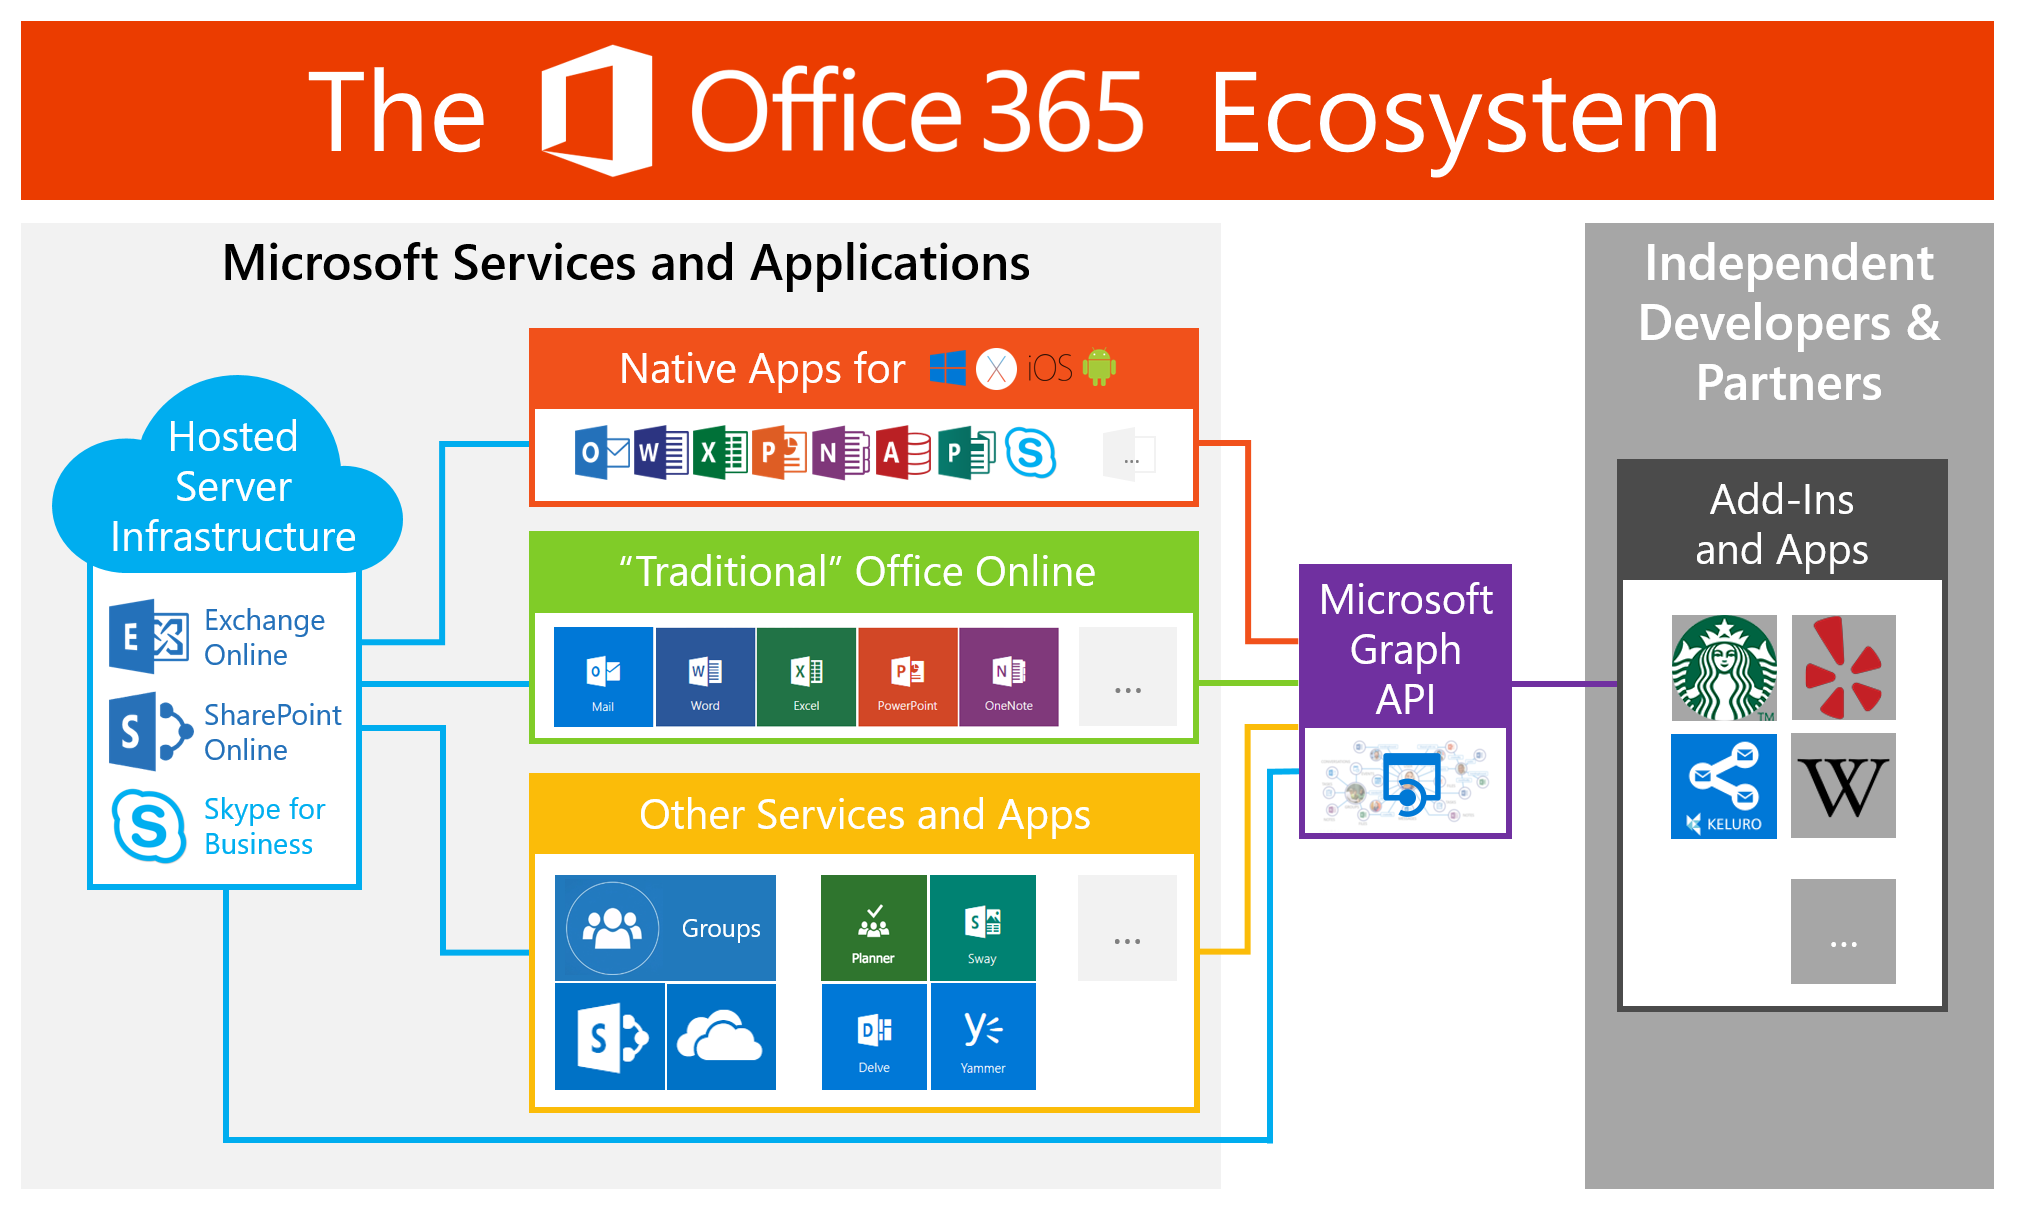 What is microsoft office 365 pdf